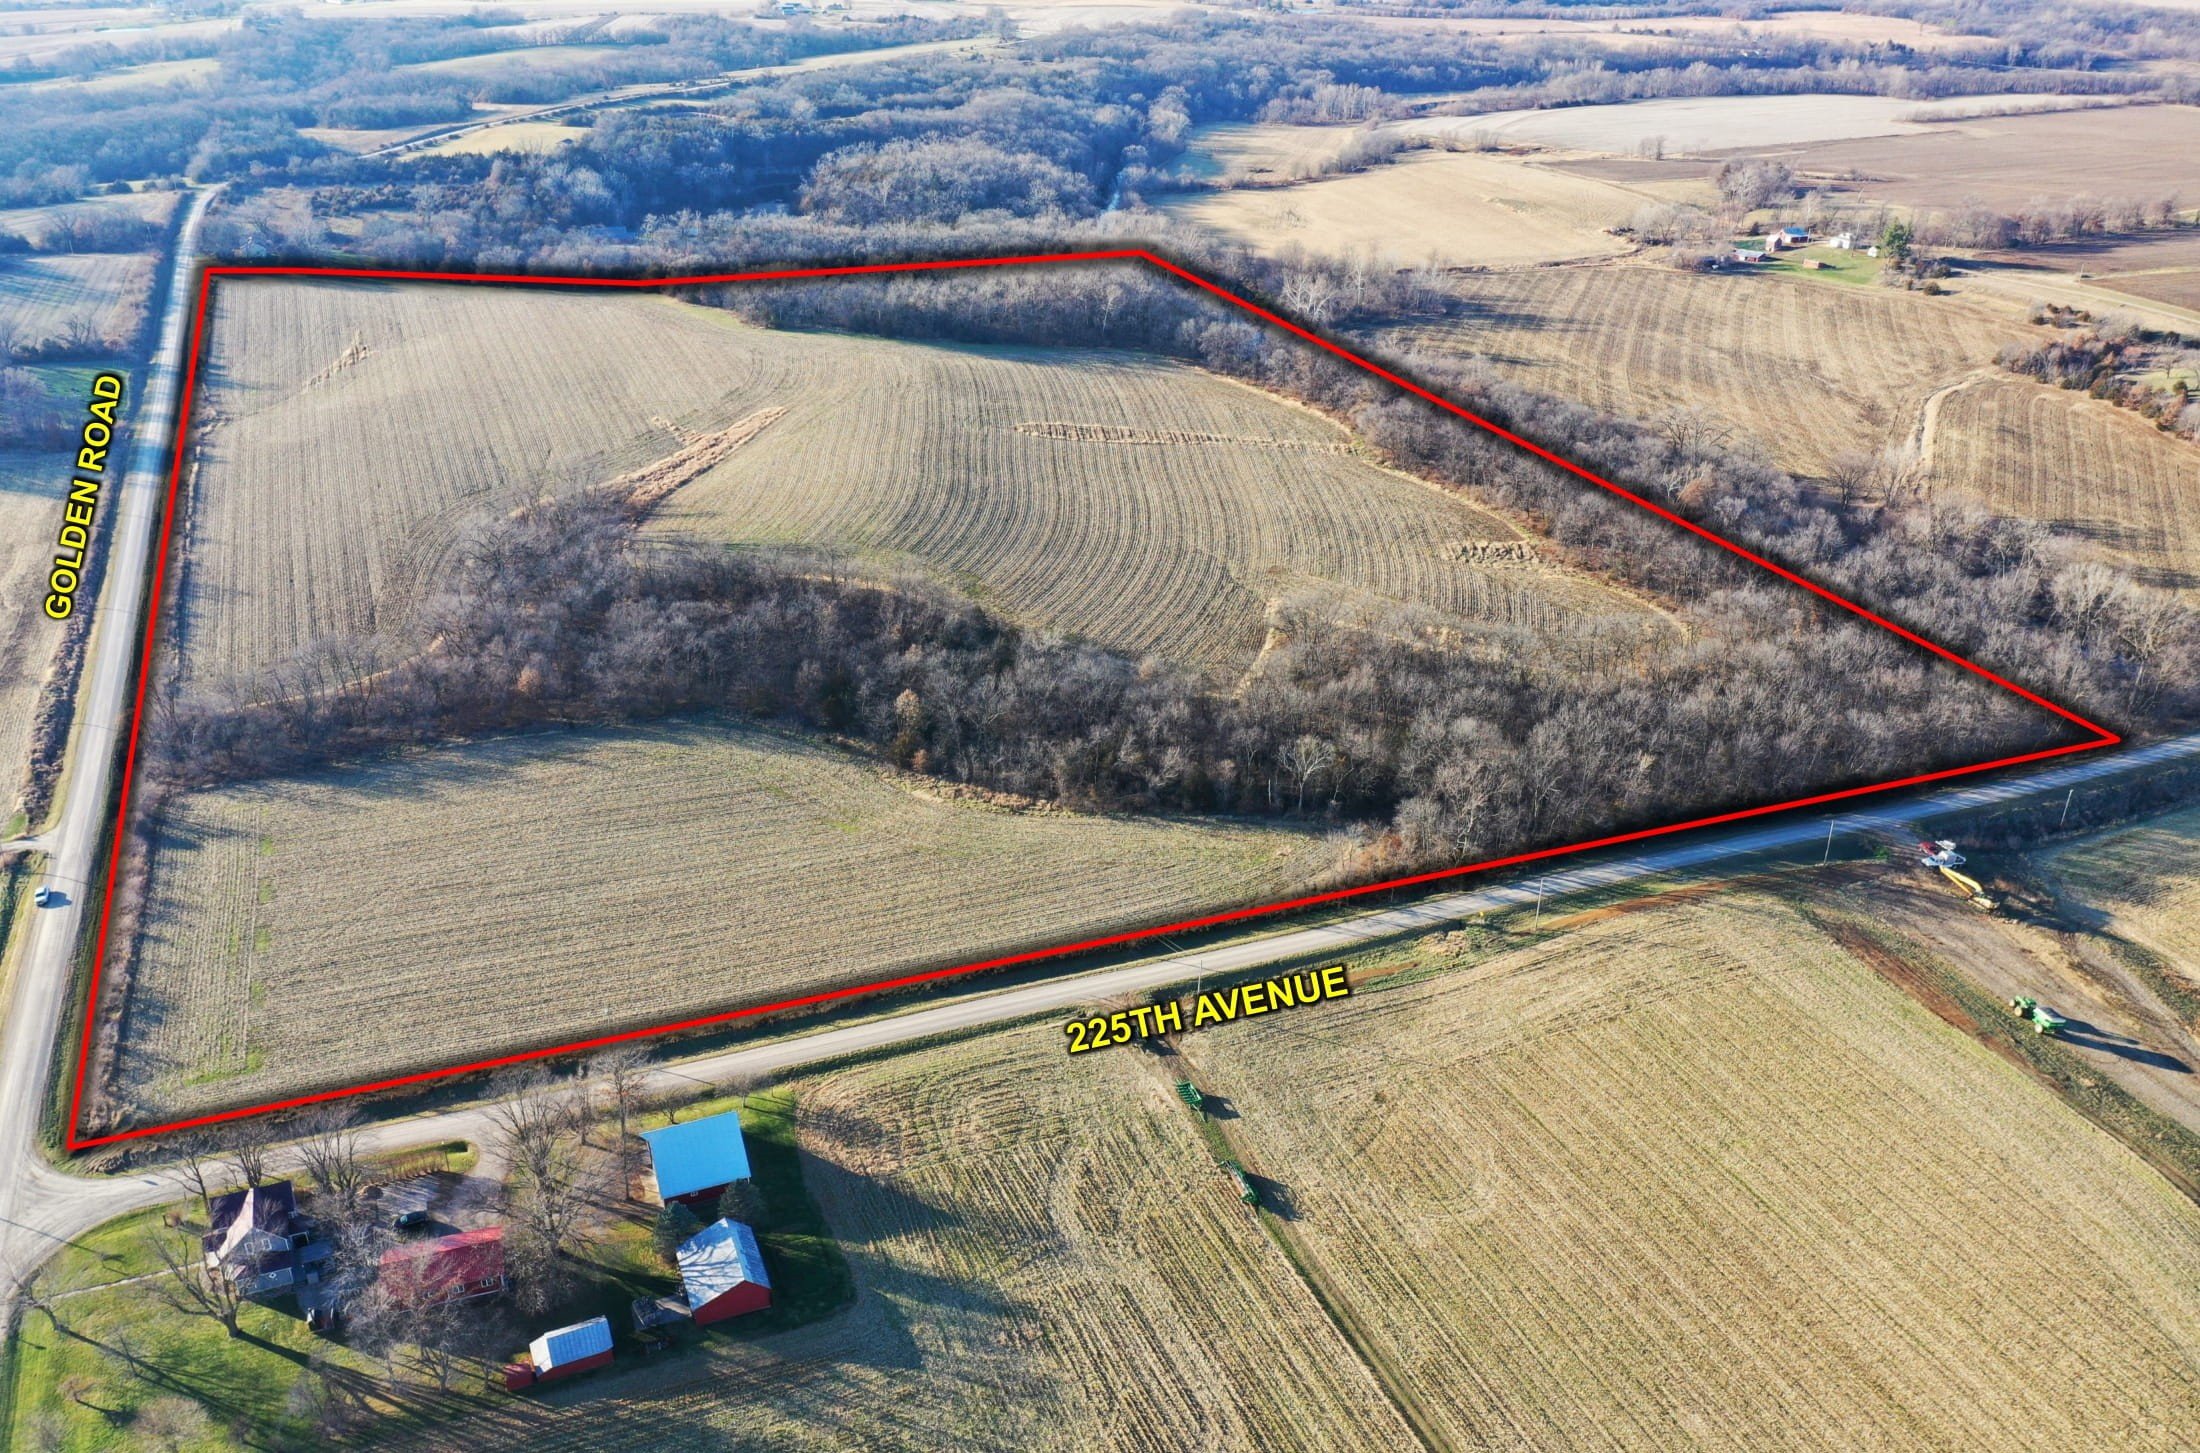 1-golden-road-225th-avenue-west-point-52656-Lee County, Iowa Land Auction Farms-05-6.jpg